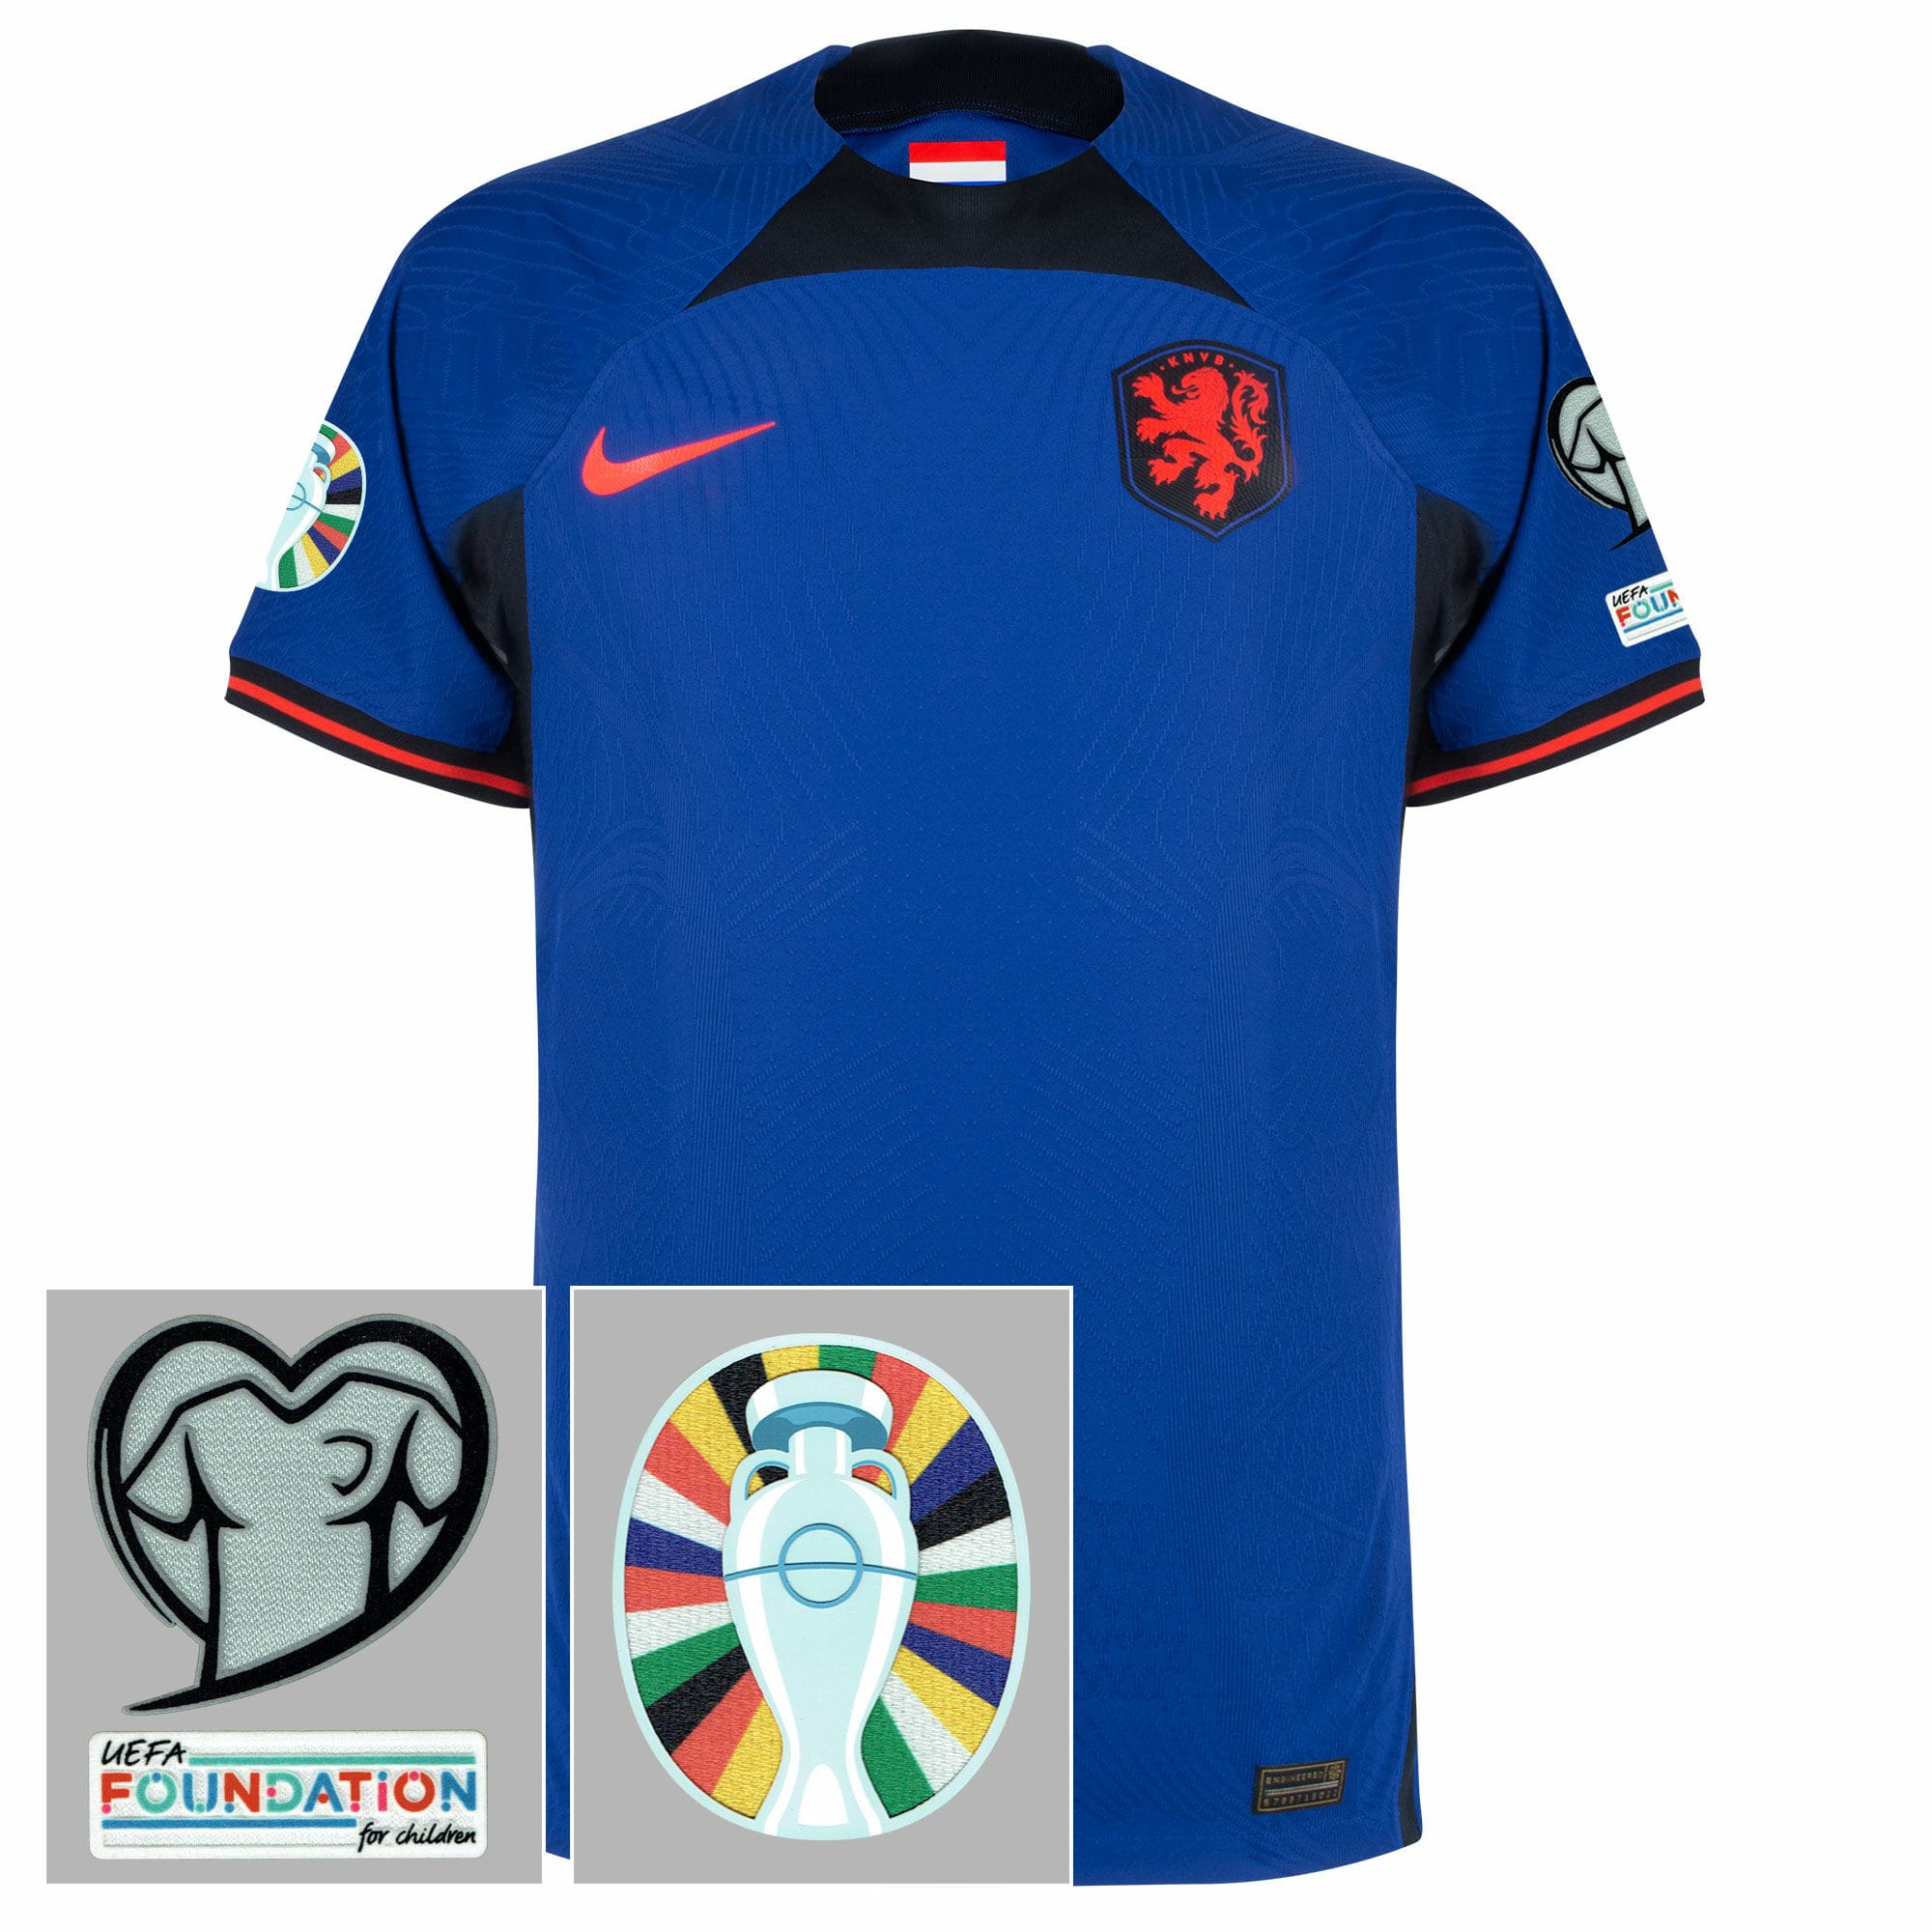 Netherland Home Jersey 22/23 Euro 2024 Qualification